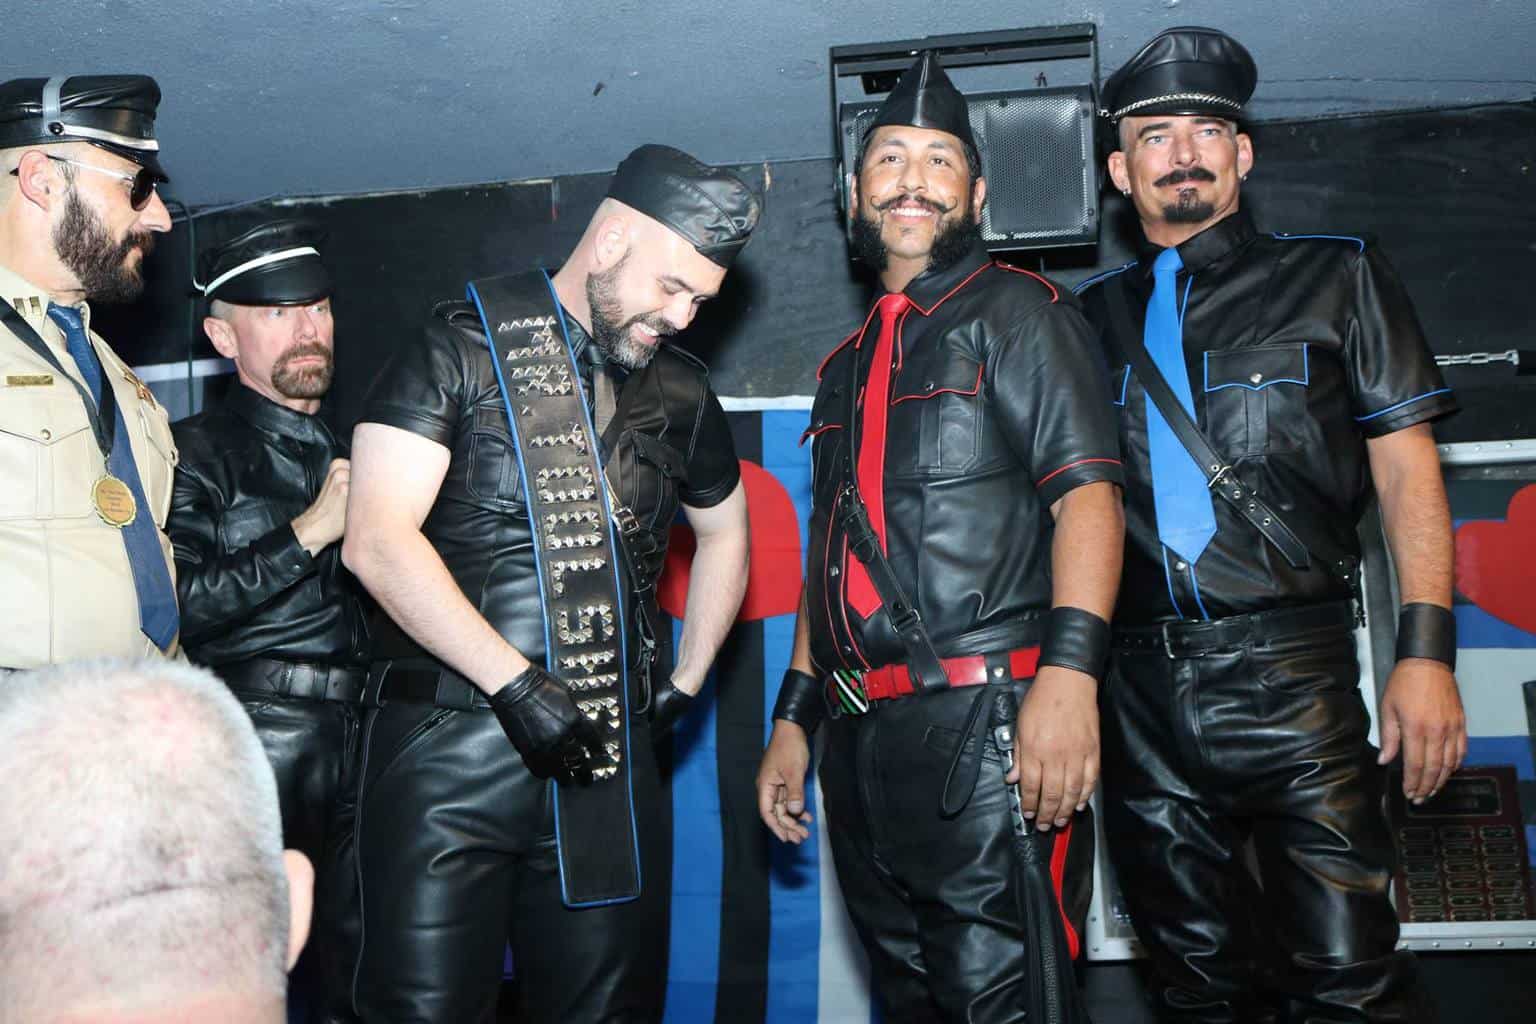 best of Bear levi leather bars Chicago gay